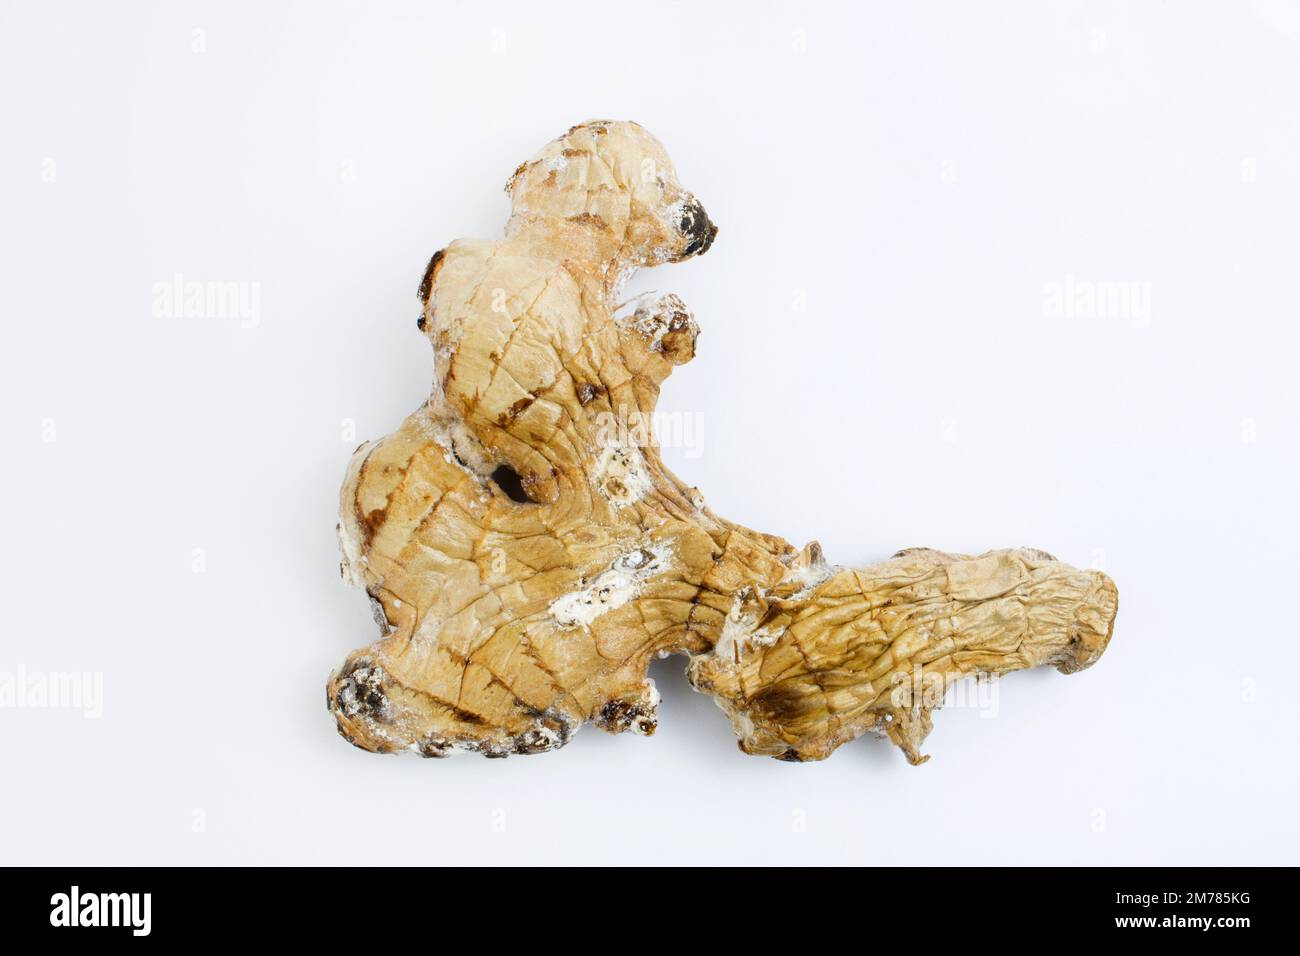 Old ugly moldy ginger, isolated on white background. Spoiled food. Stock Photo